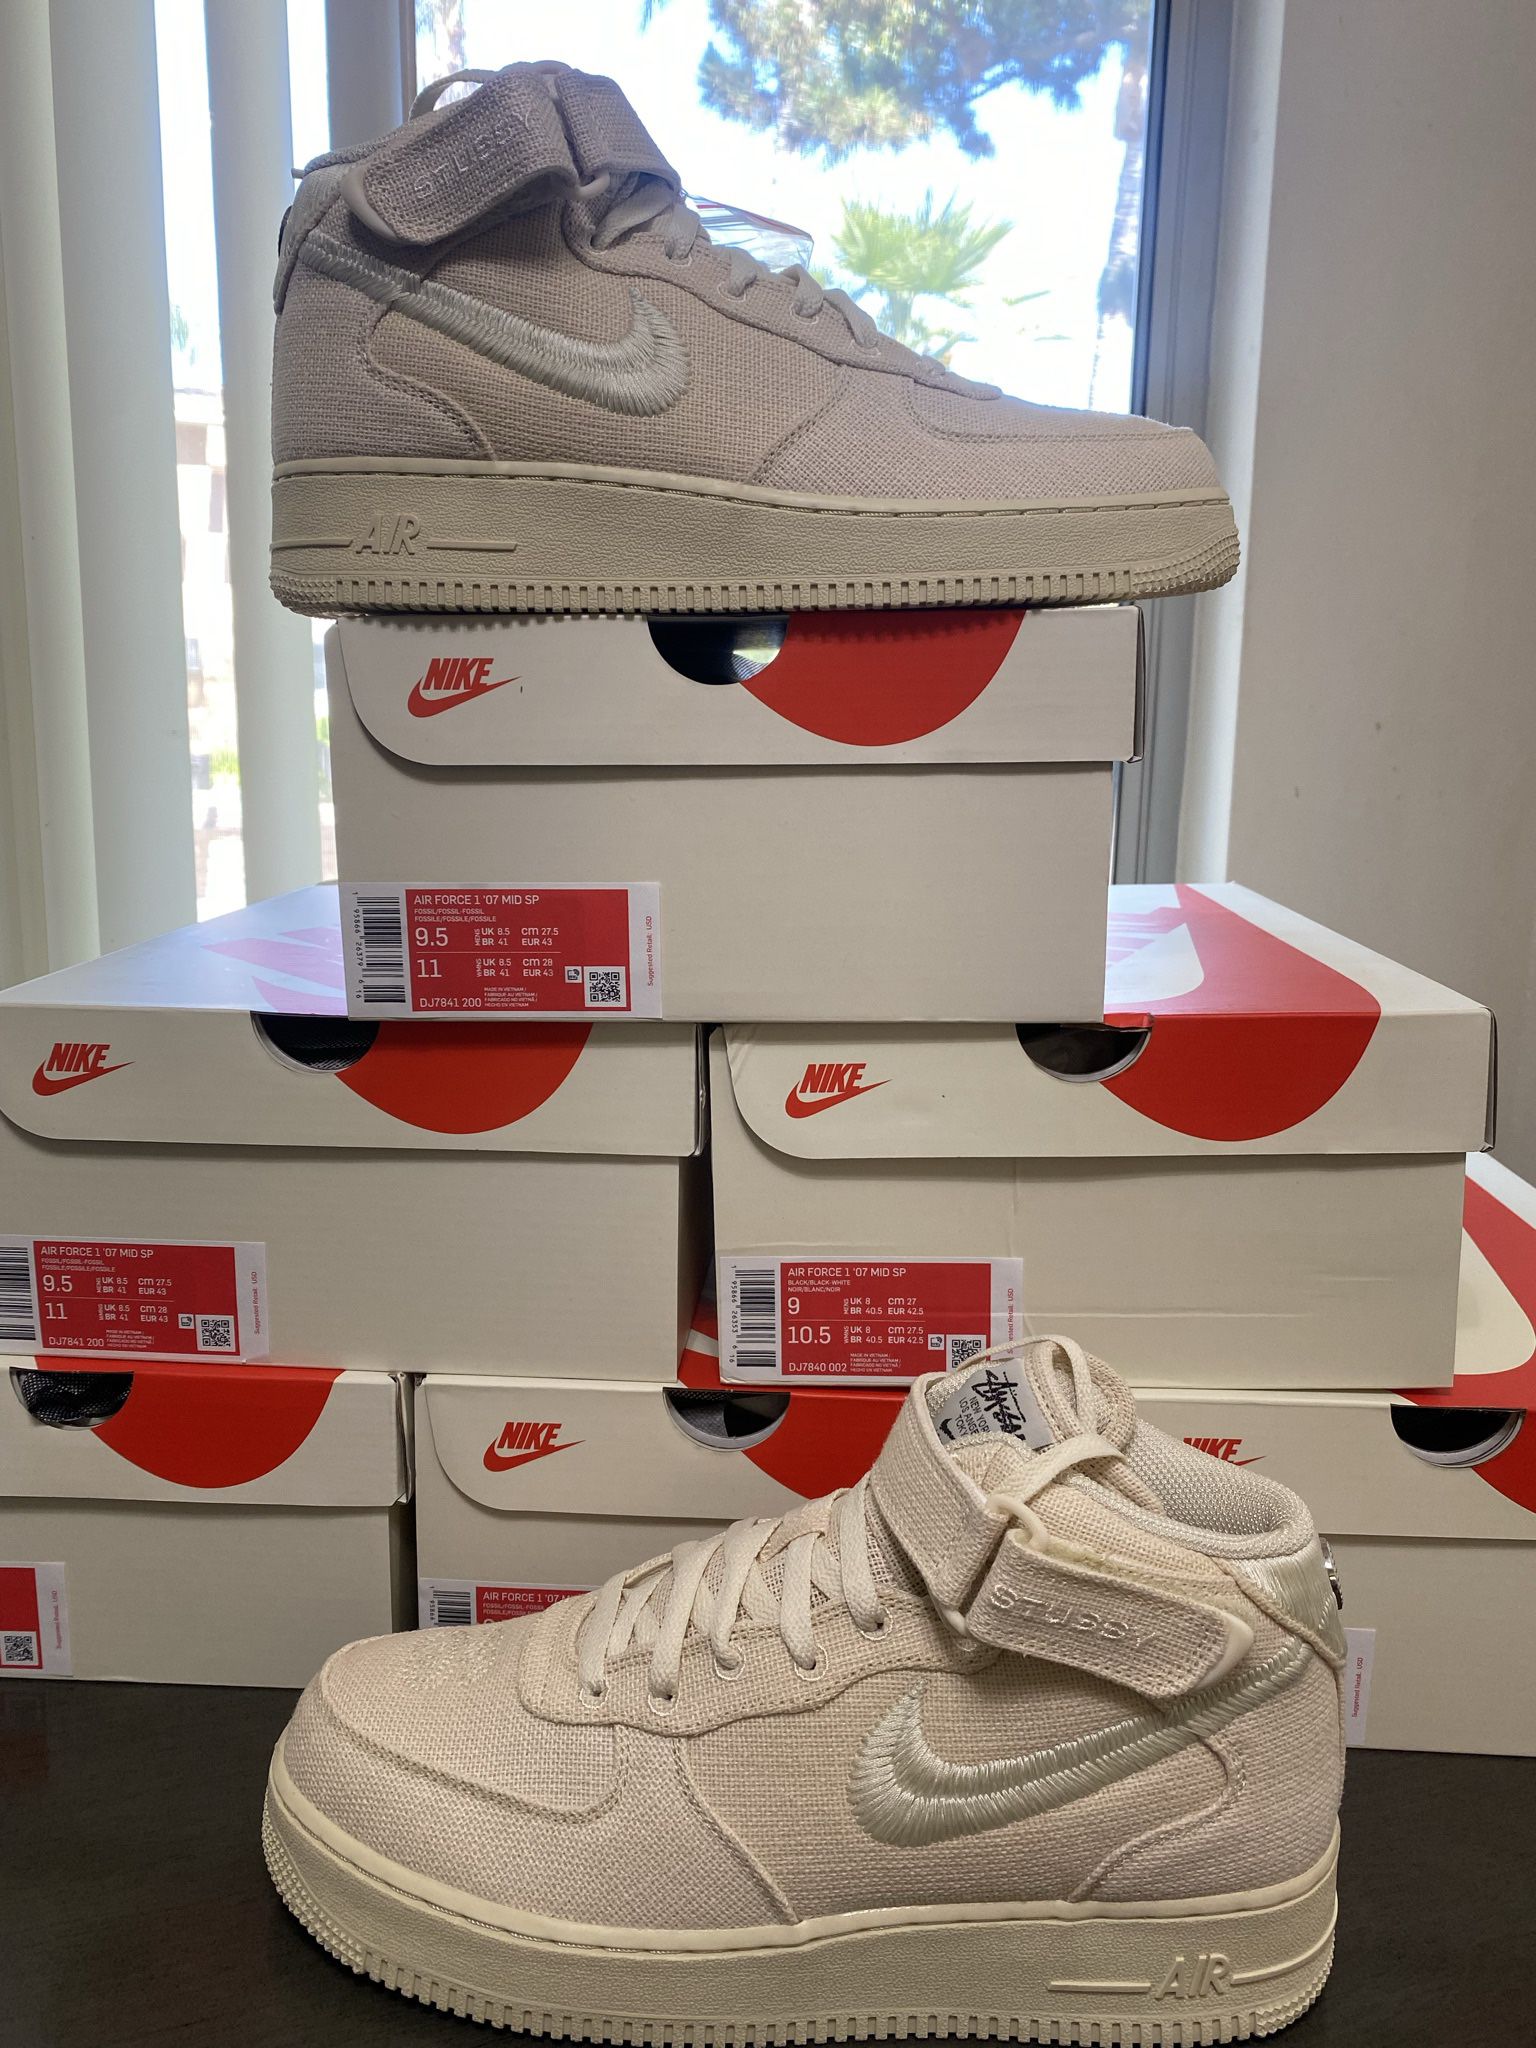 Nike Airforce 1 Stussy Sizes 6.5,13 Price Firm